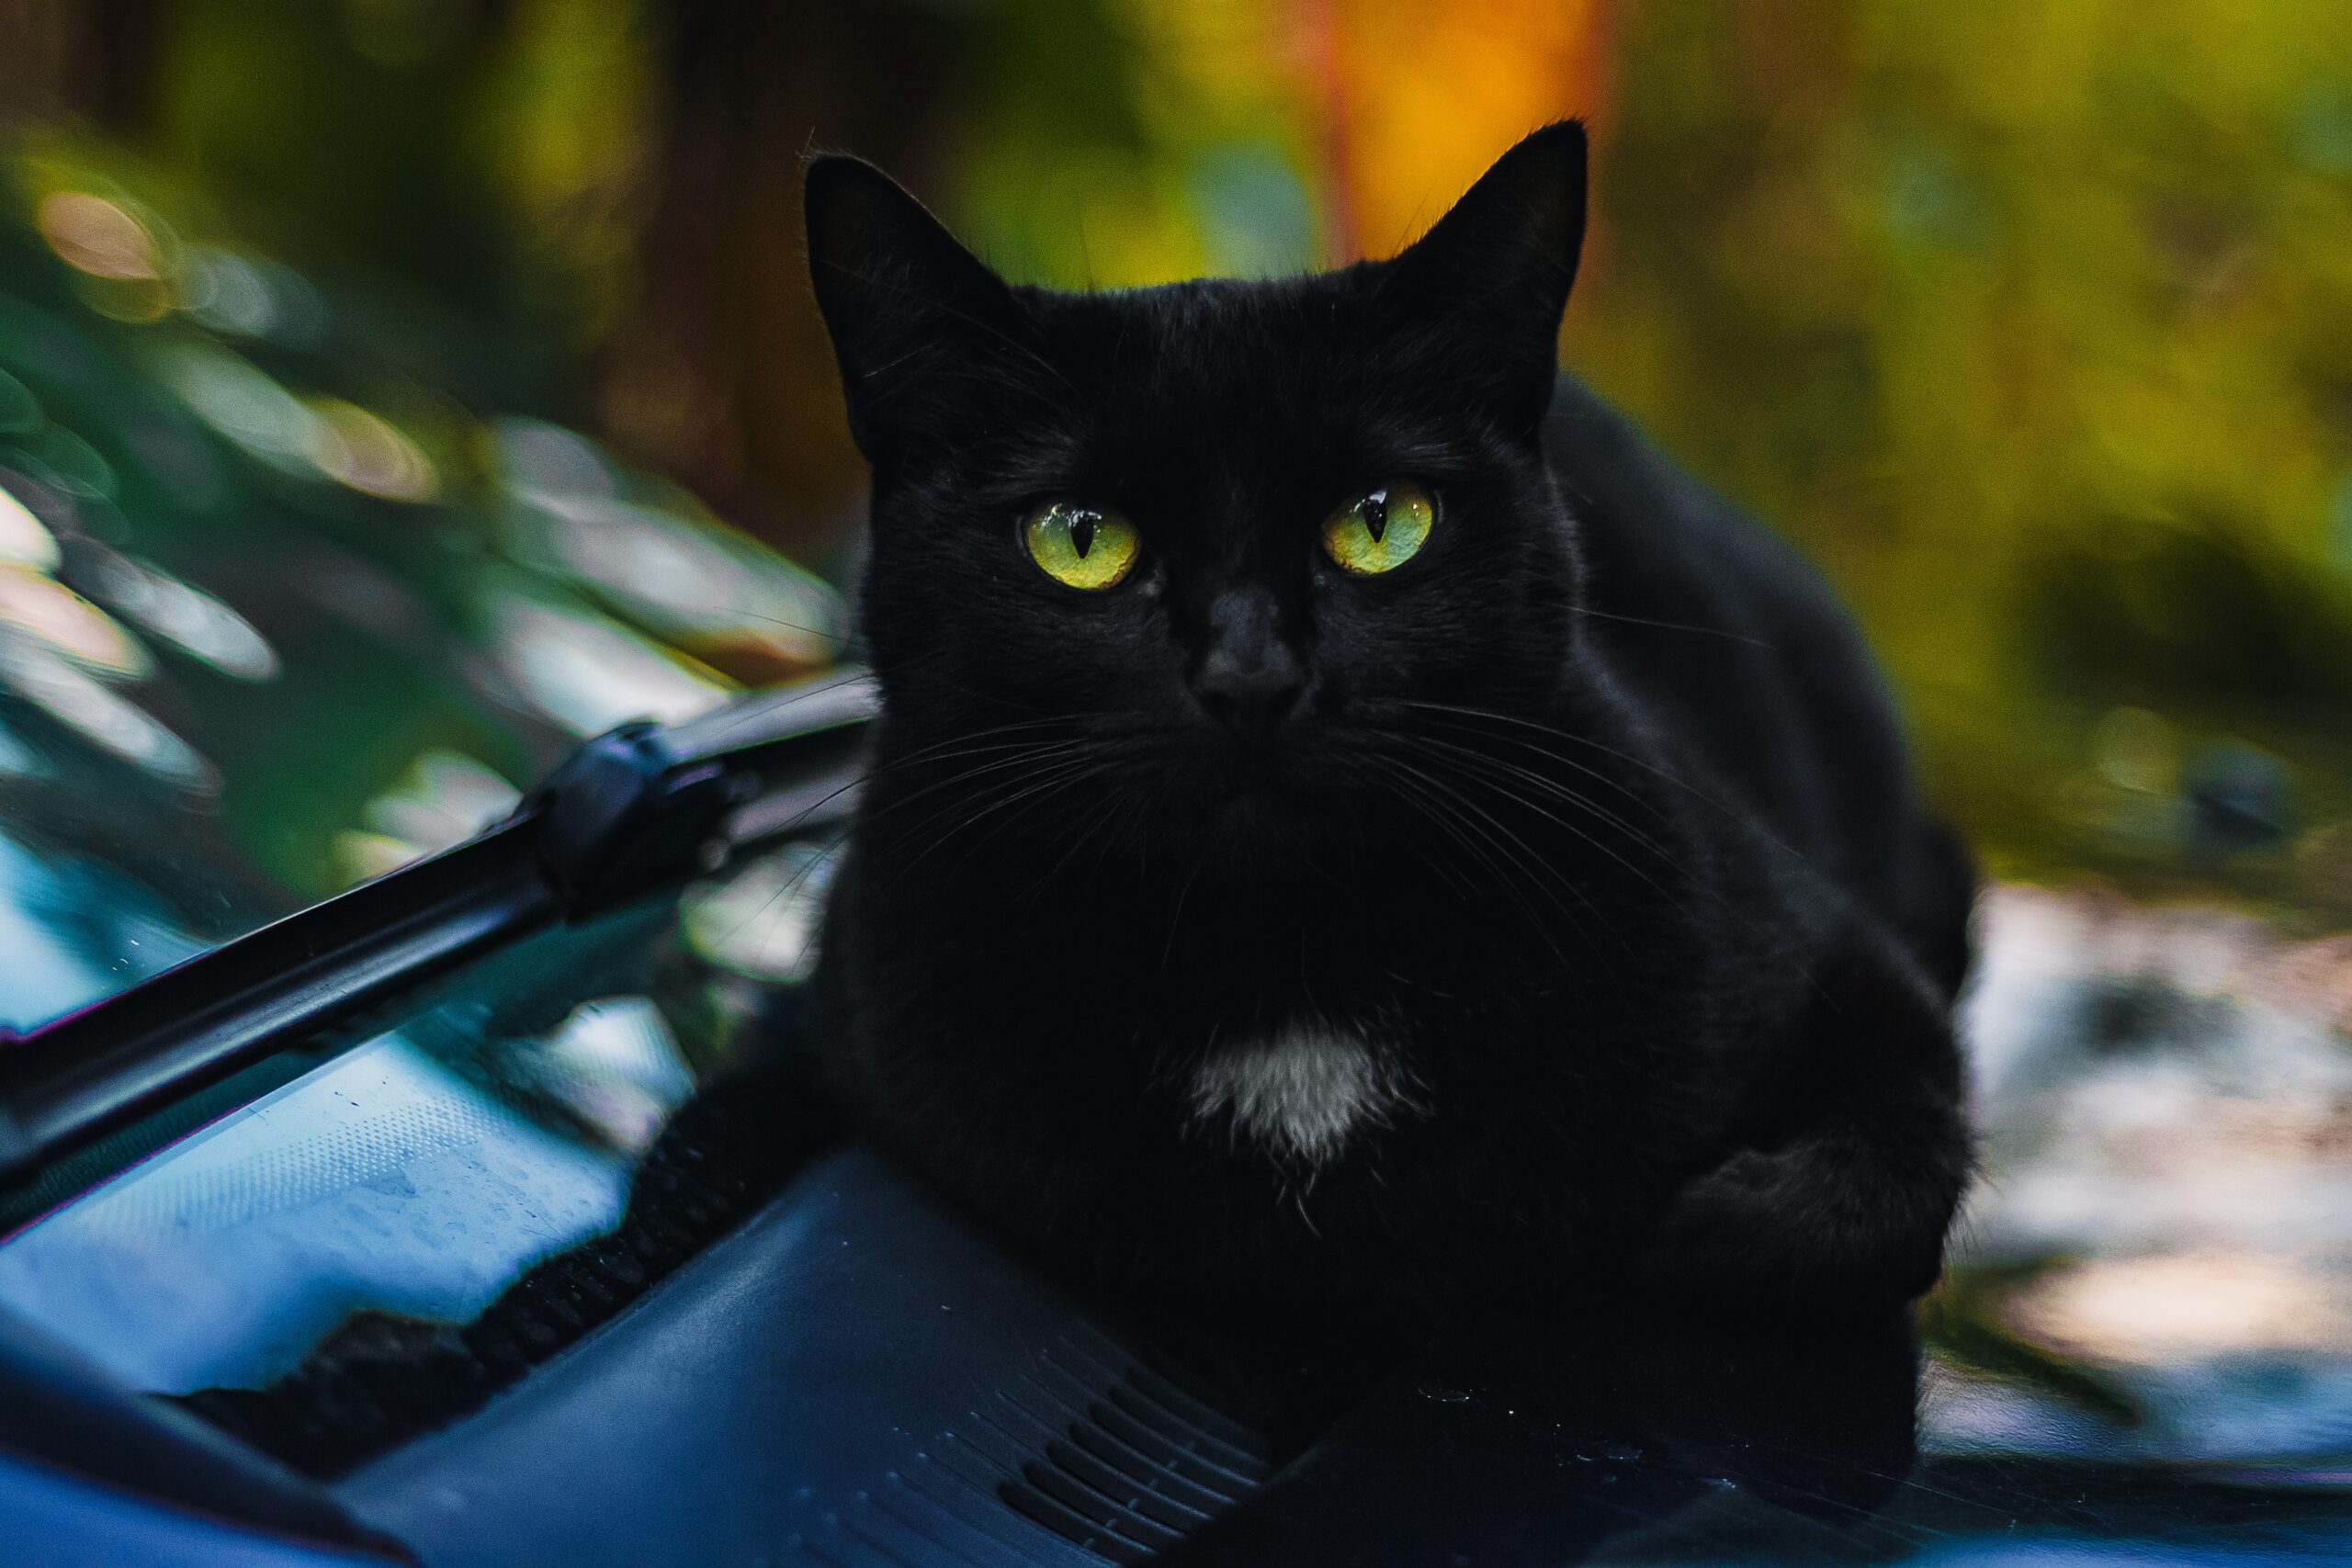 A black cat with green eyes comfortably resting in the jungle with eyes wide open